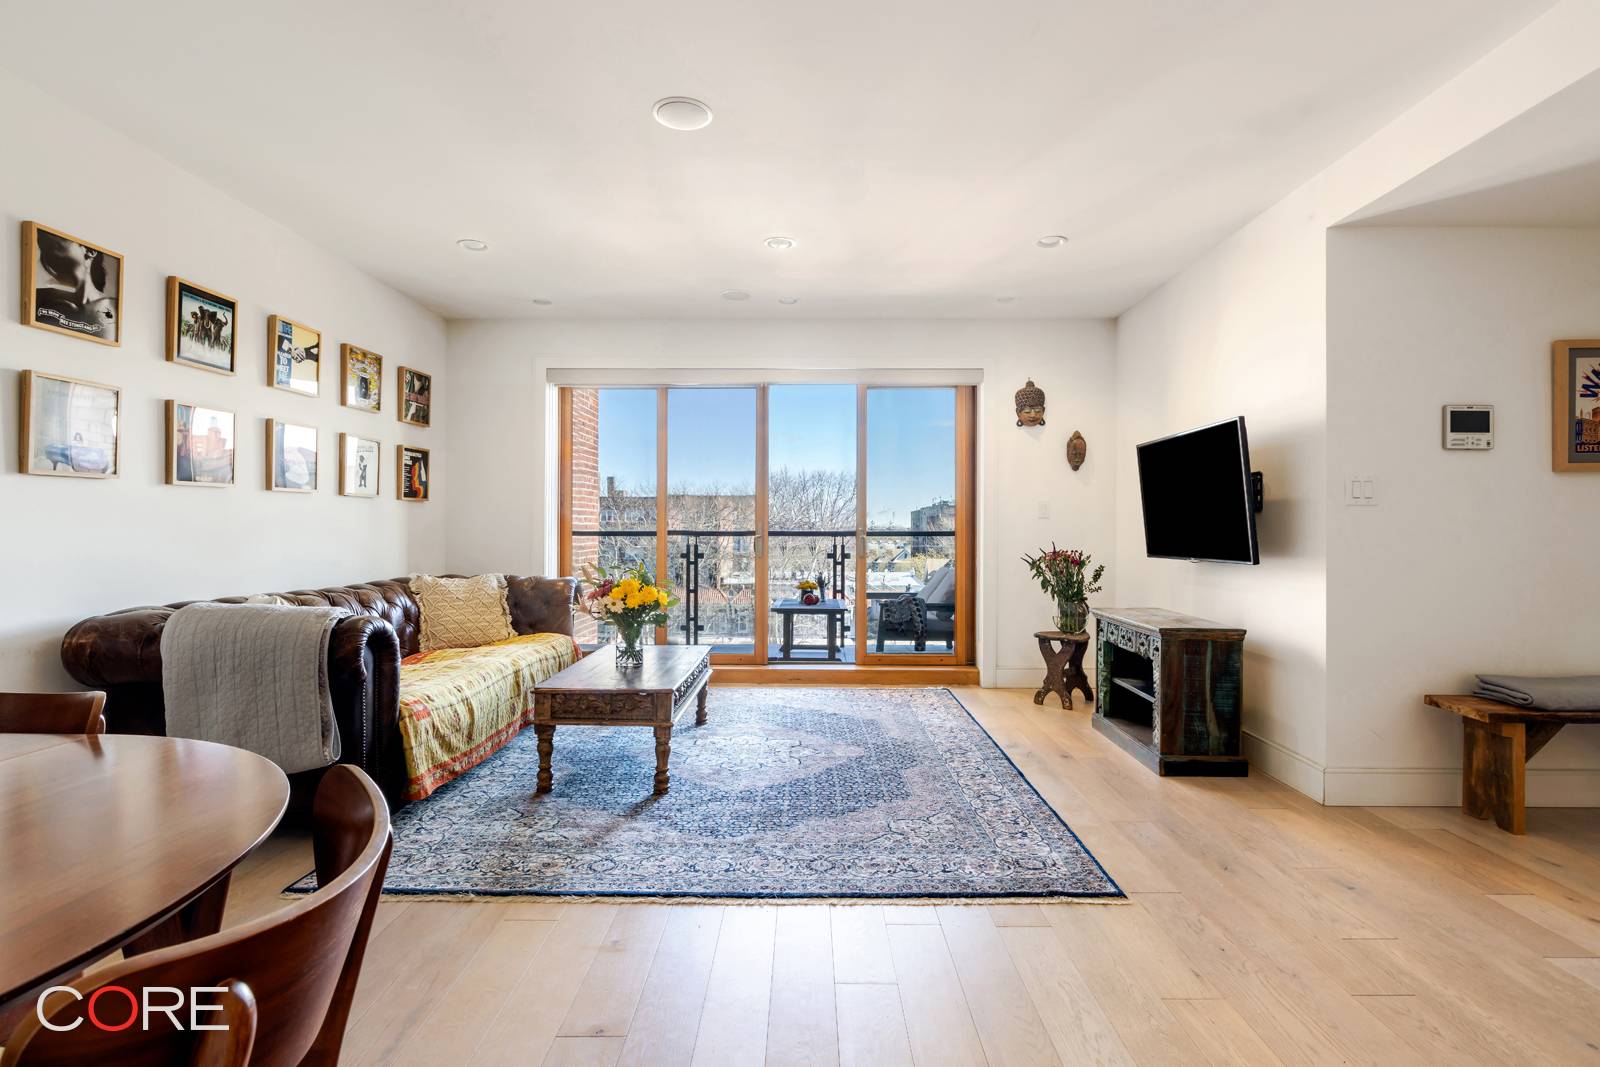 Introducing unit 6B, a minimalistic two bedroom, two bathroom residence boasting a balcony overlooking the tranquil scenery behind Ocean Parkway.